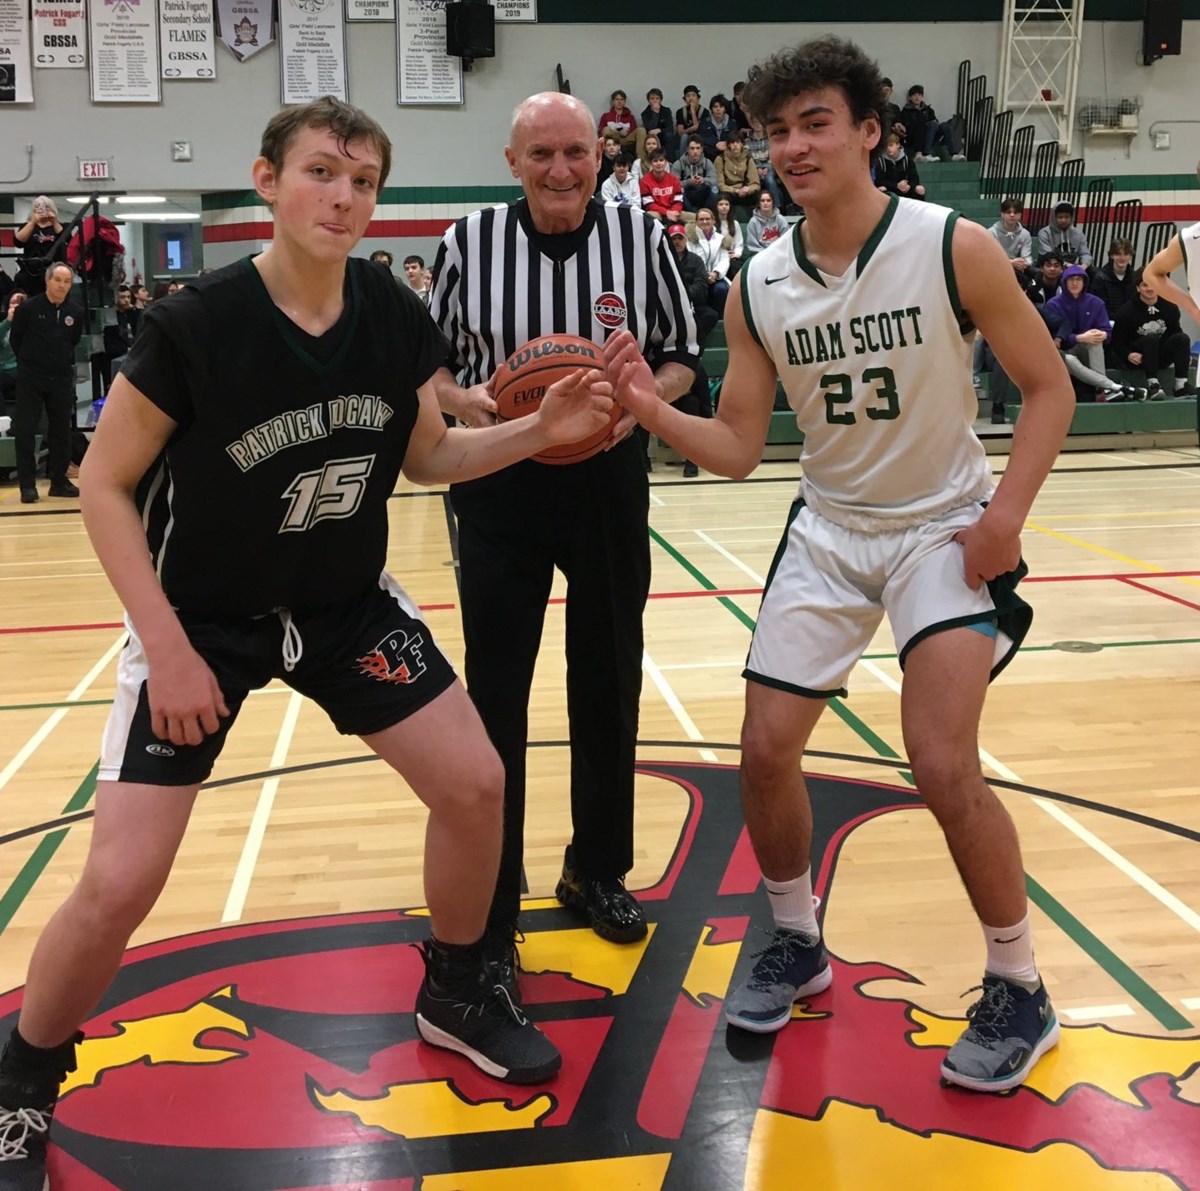 75th Blackball Classic off to a fast start in local gyms - Orillia News